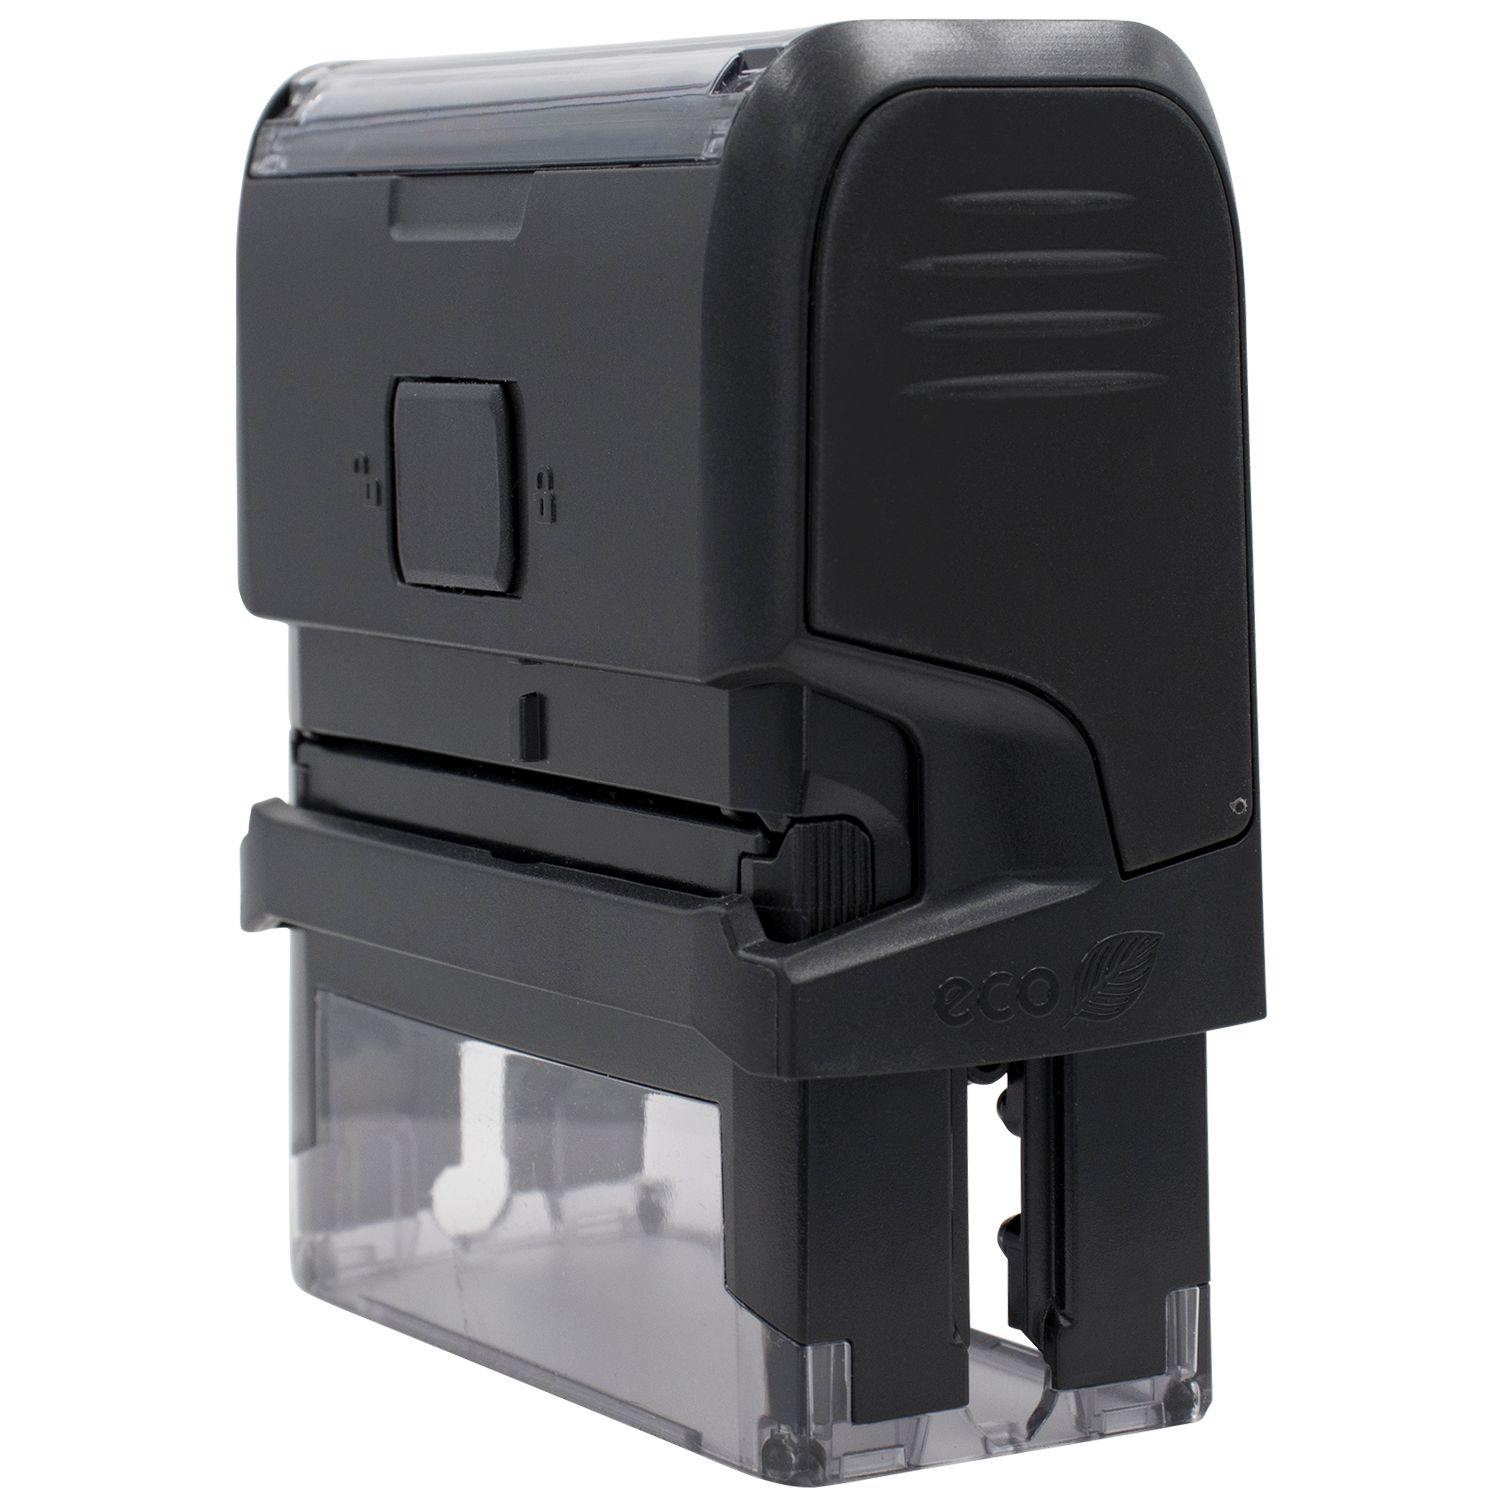 Side View of Large Self Inking Approved For Payment Stamp at an Angle